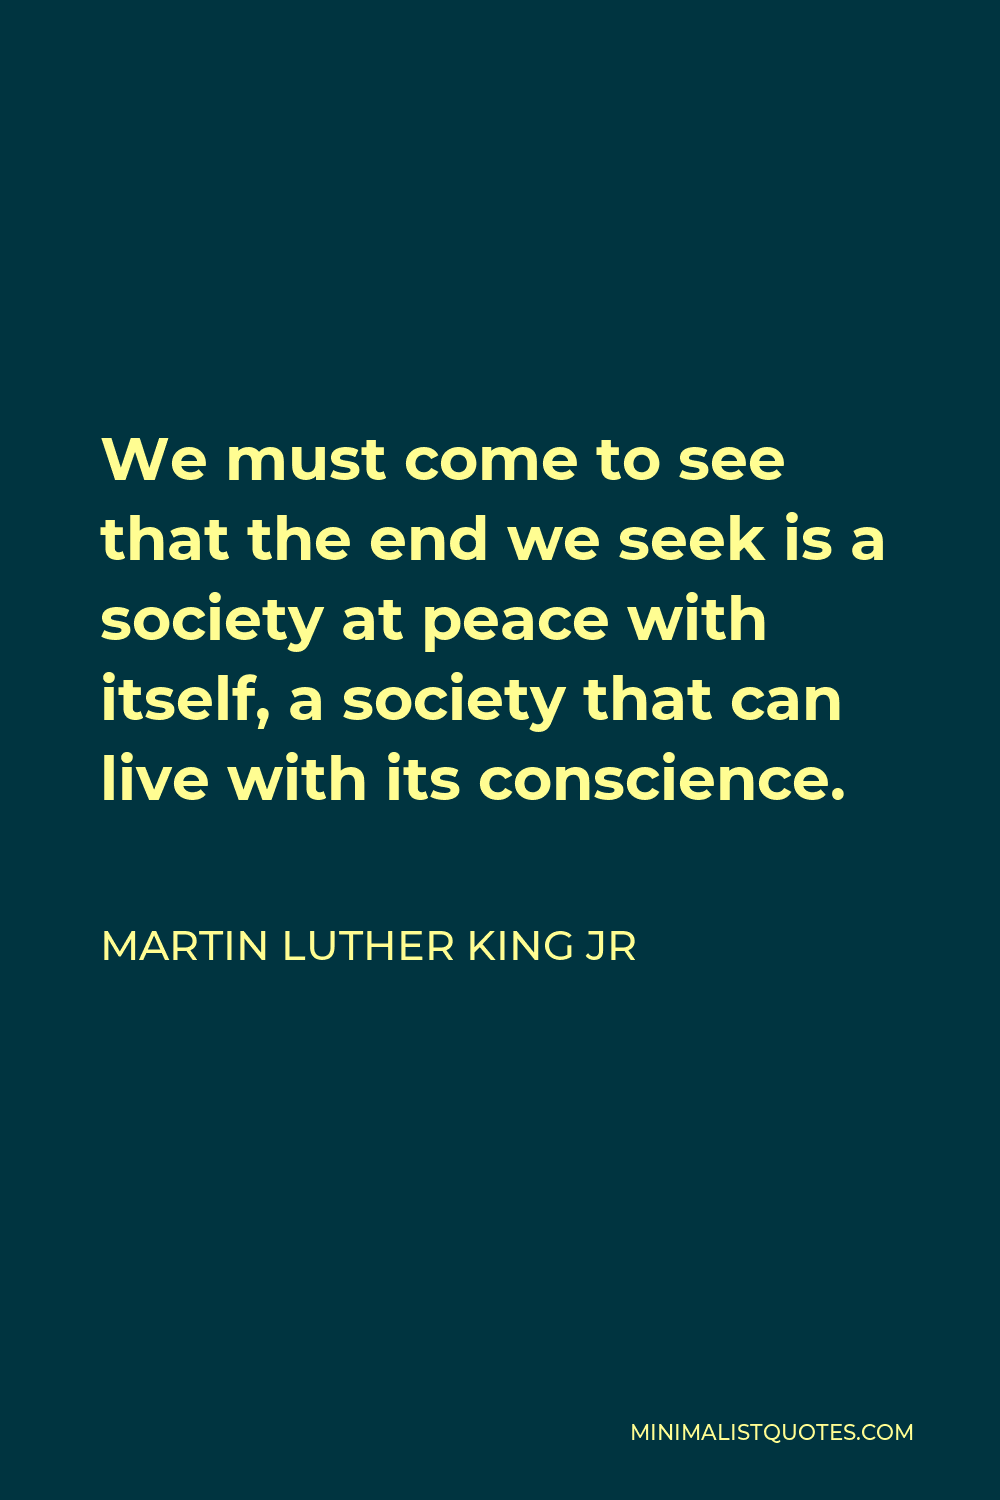 Martin Luther King Jr Quote - We must come to see that the end we seek is a society at peace with itself, a society that can live with its conscience.